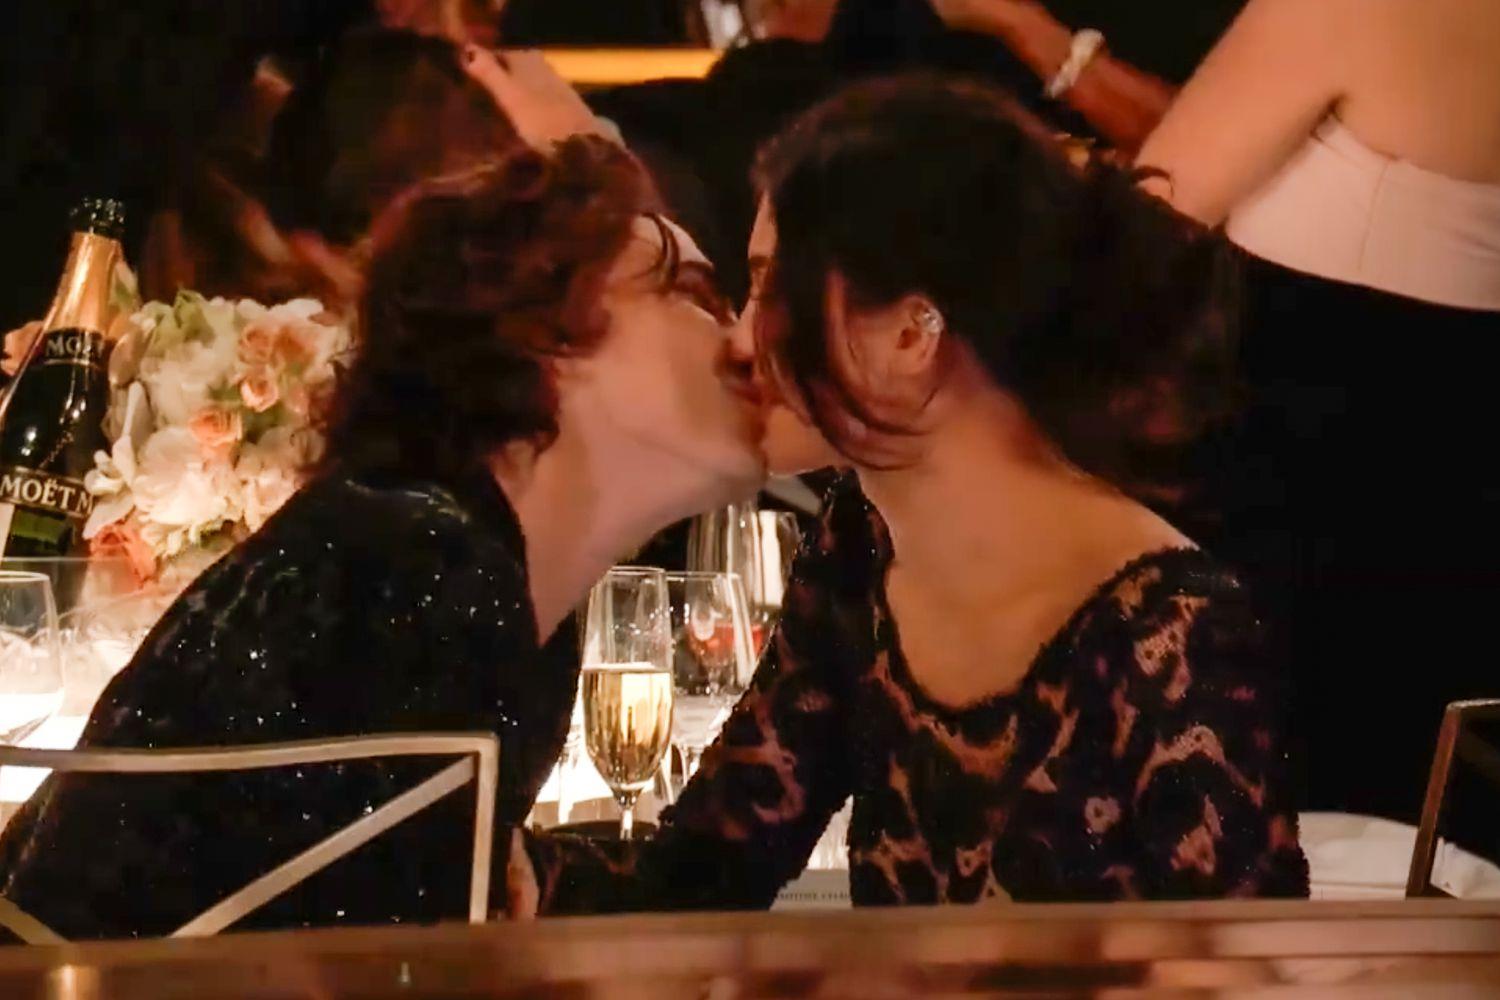 Timothee Chalamet and Kylie Jenner shared a sweet peck at the award show